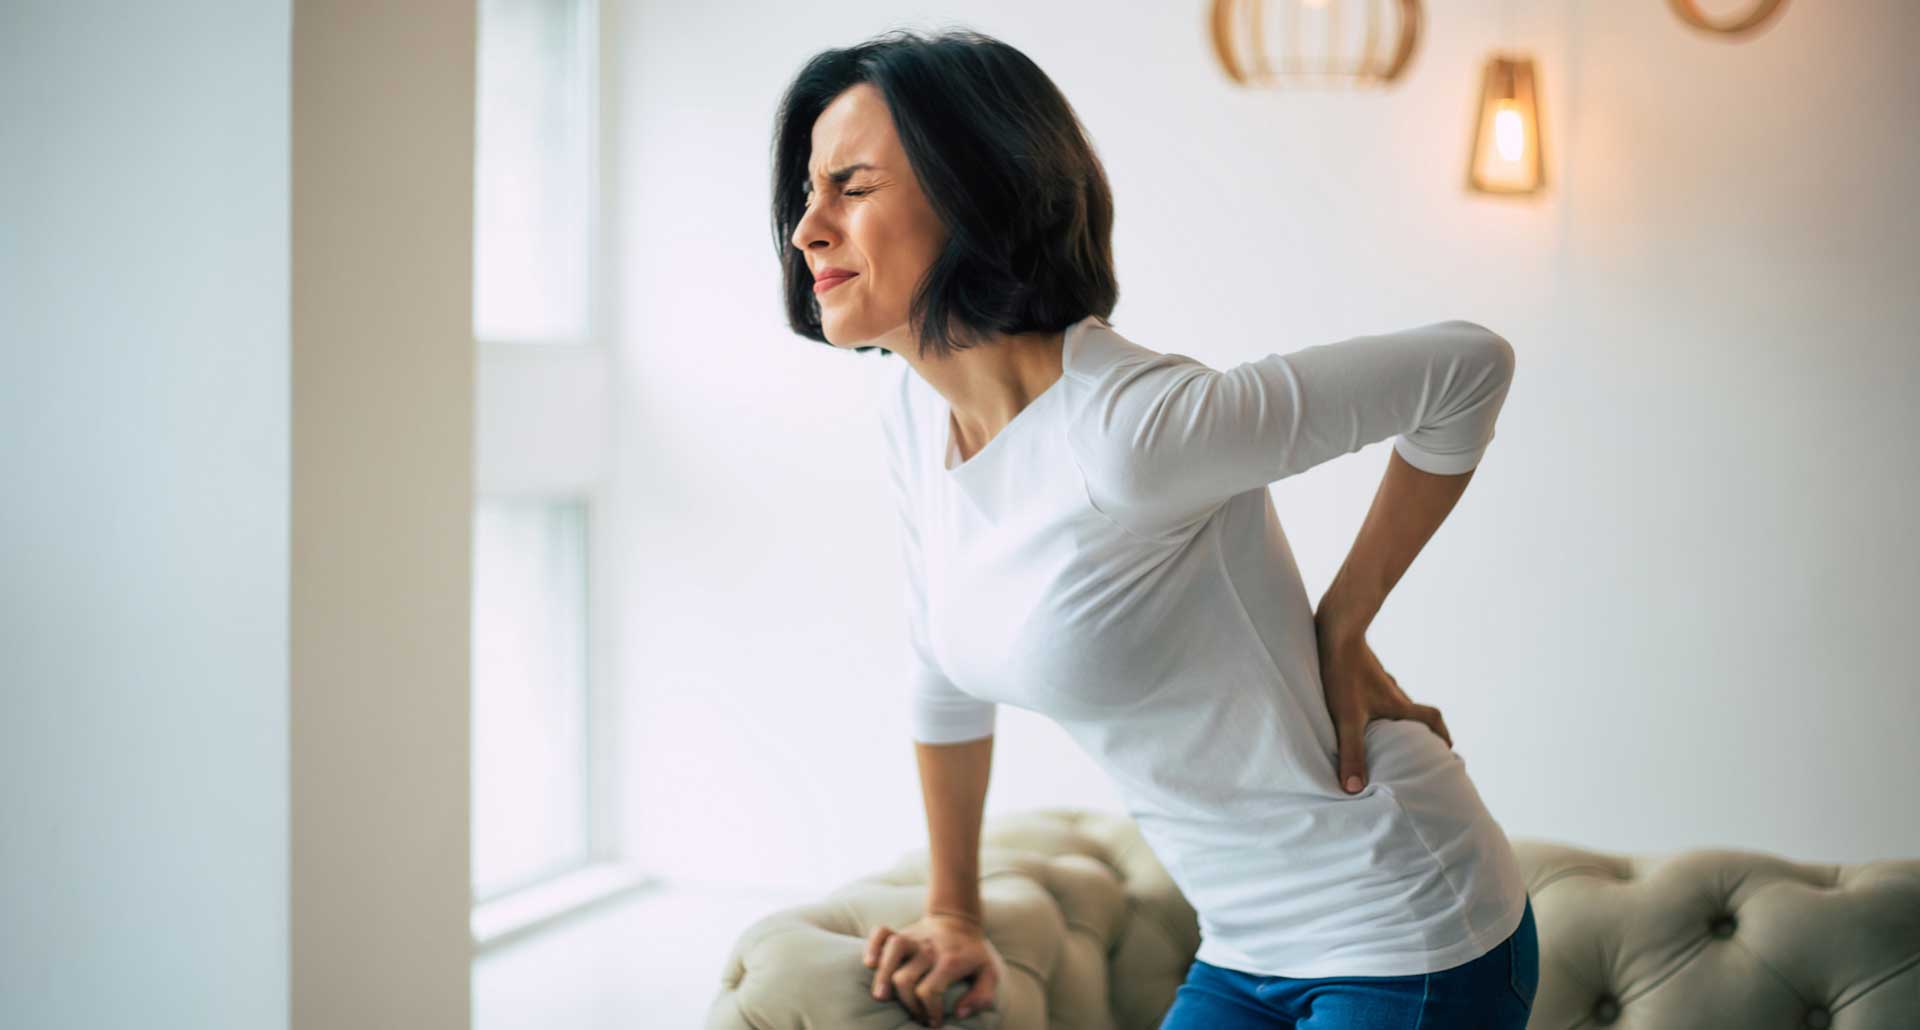 back pain treatment to reduce pain, improve movement, osteopathic treatment